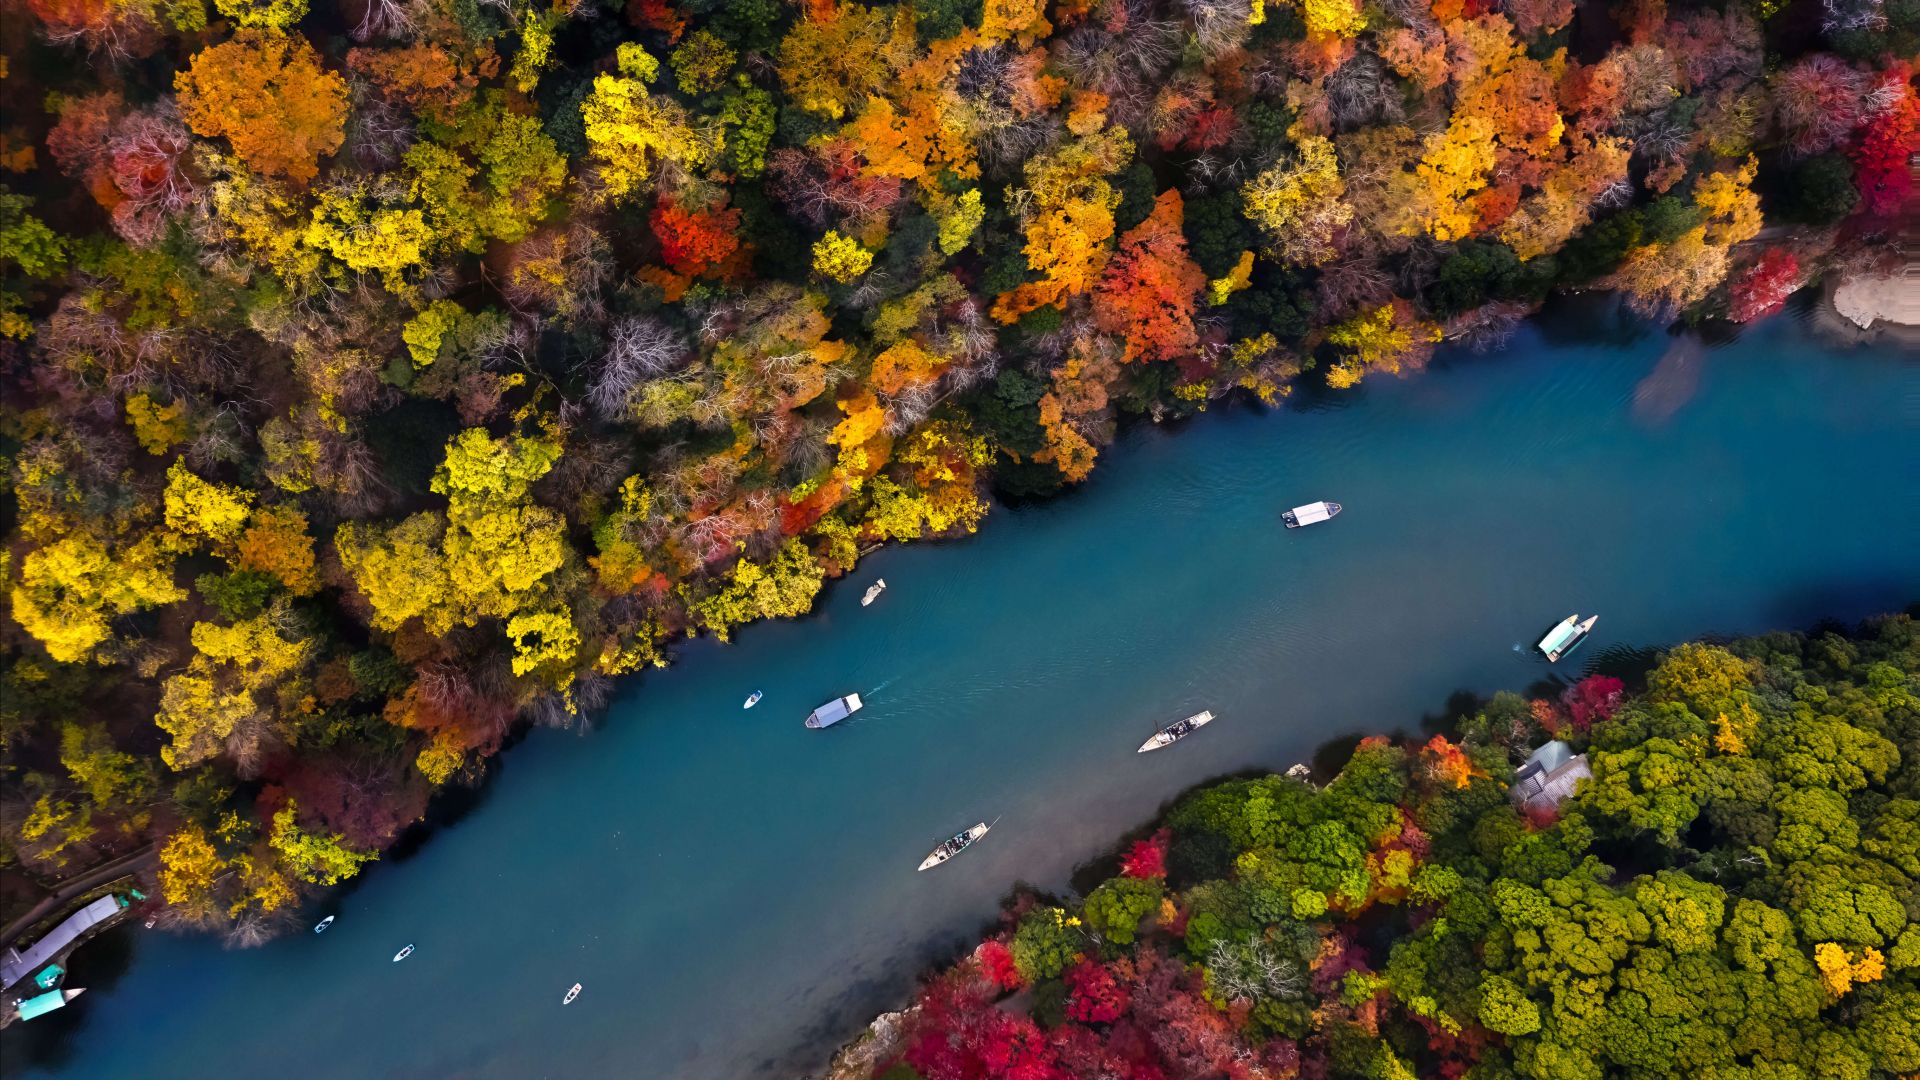 Colorful River 5K Wallpapers